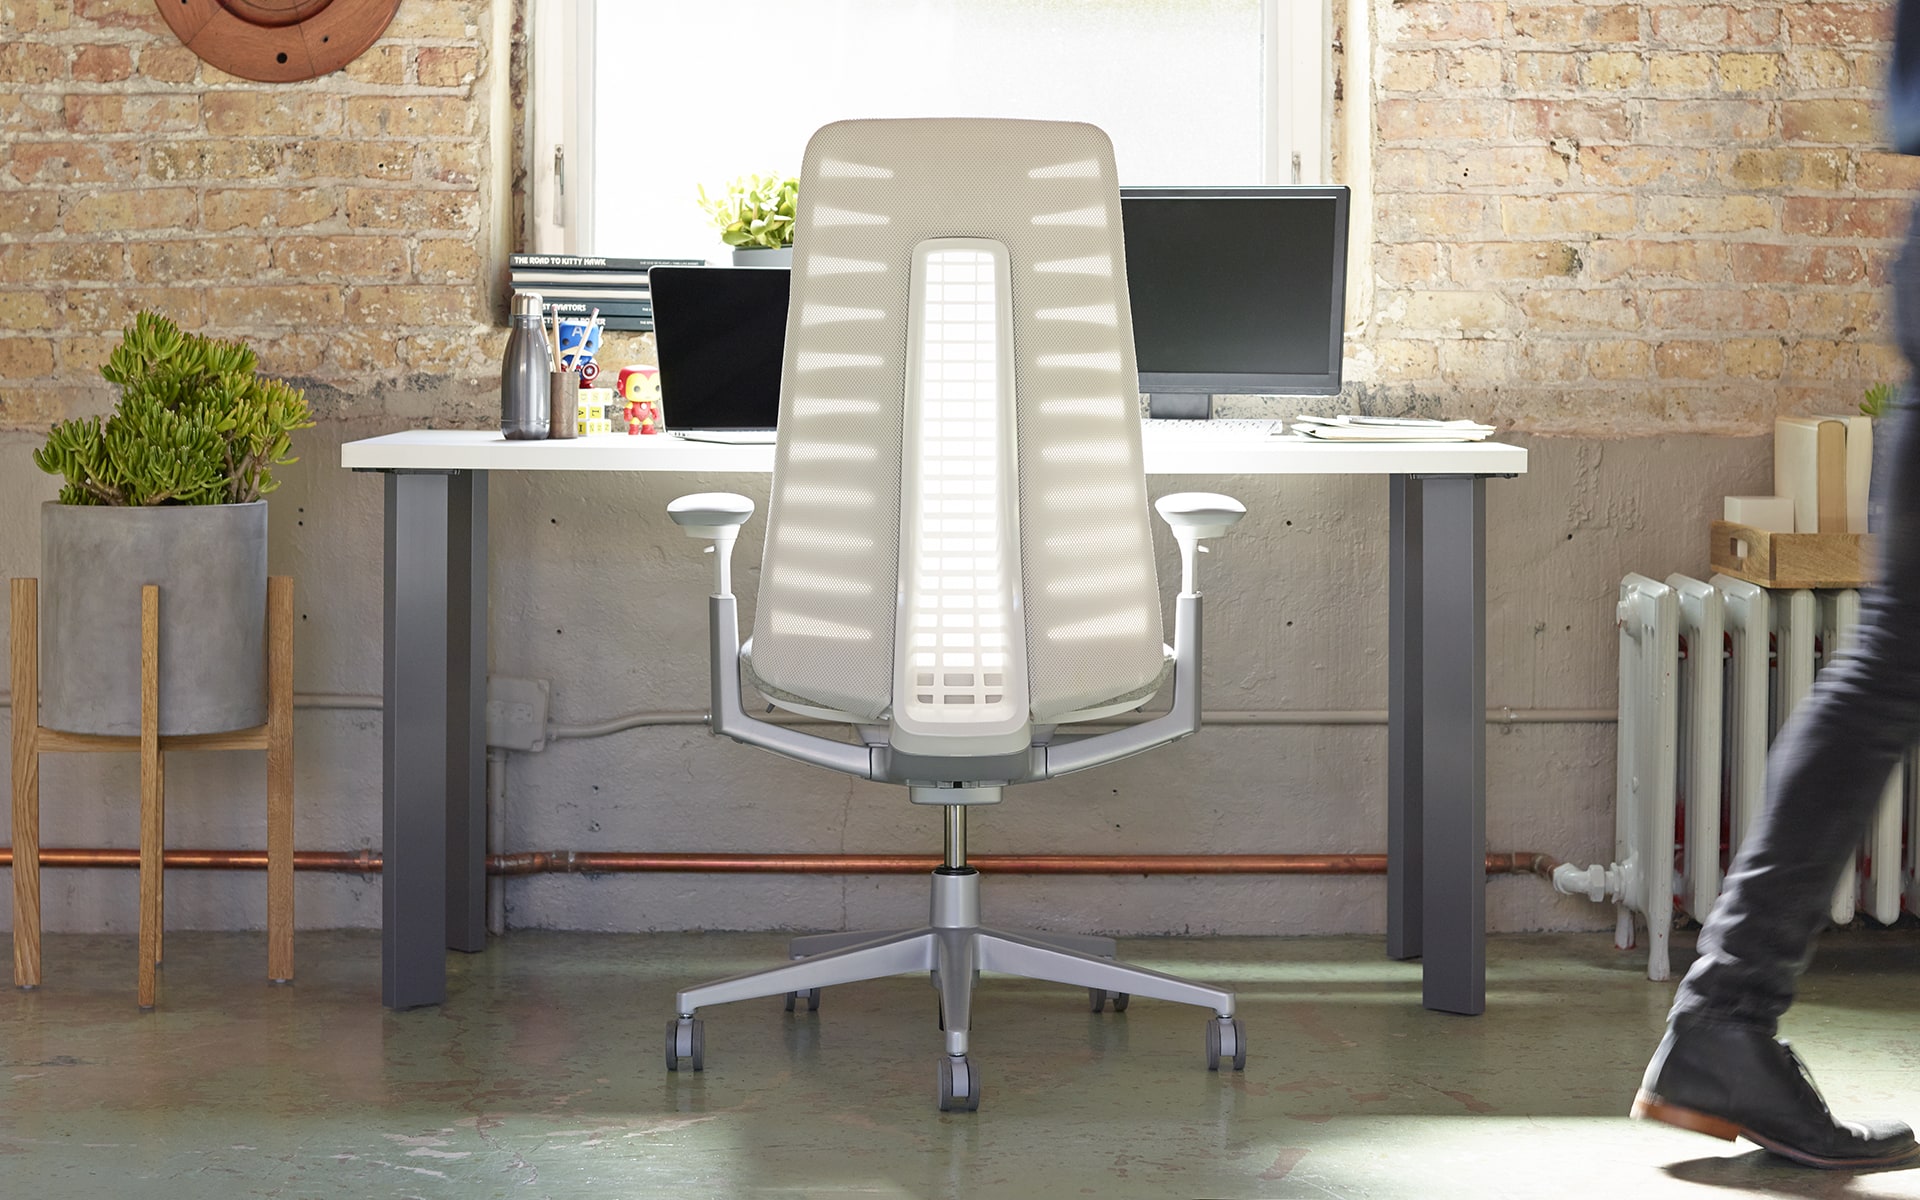 Haworth Fern office chair by ITO Design with white backrest at industrial chic workplace